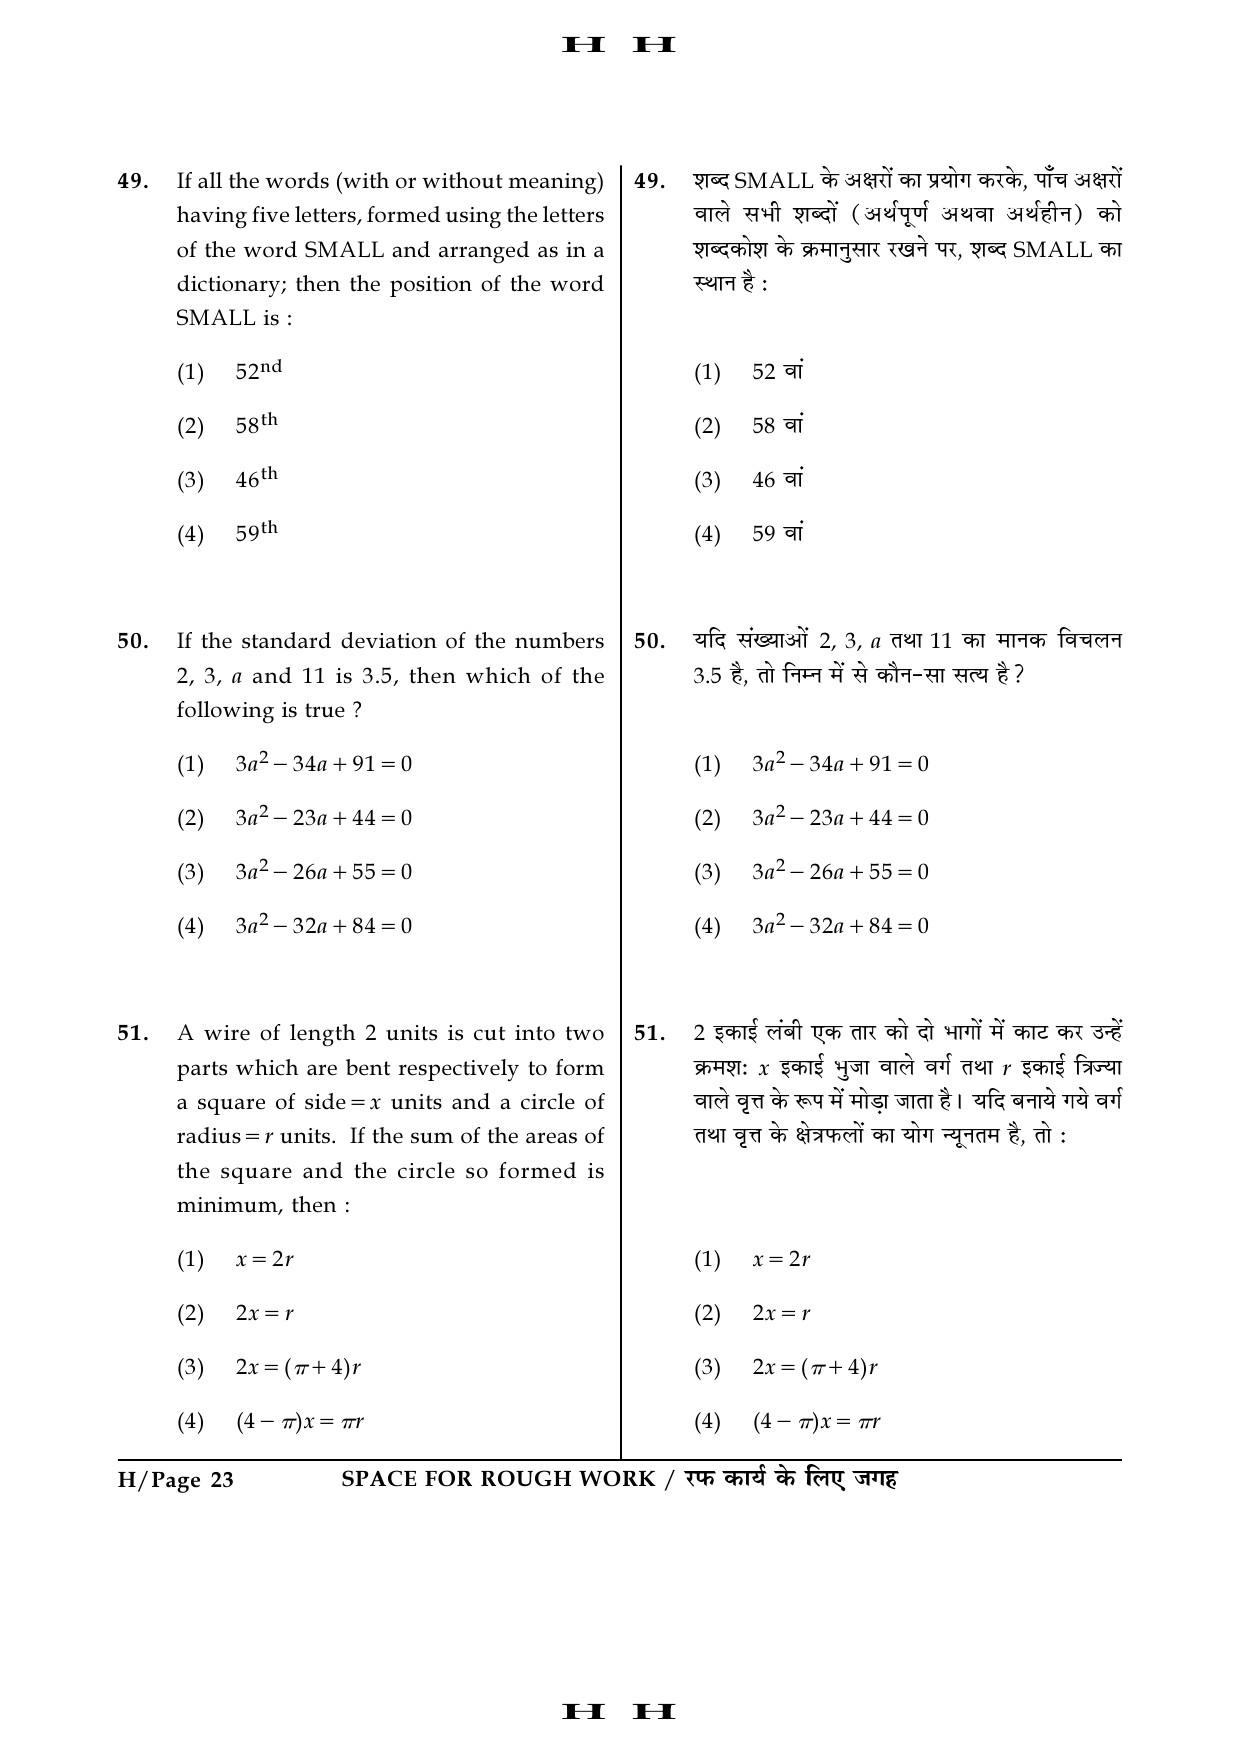 JEE Main Exam Question Paper 2016 Booklet H 23